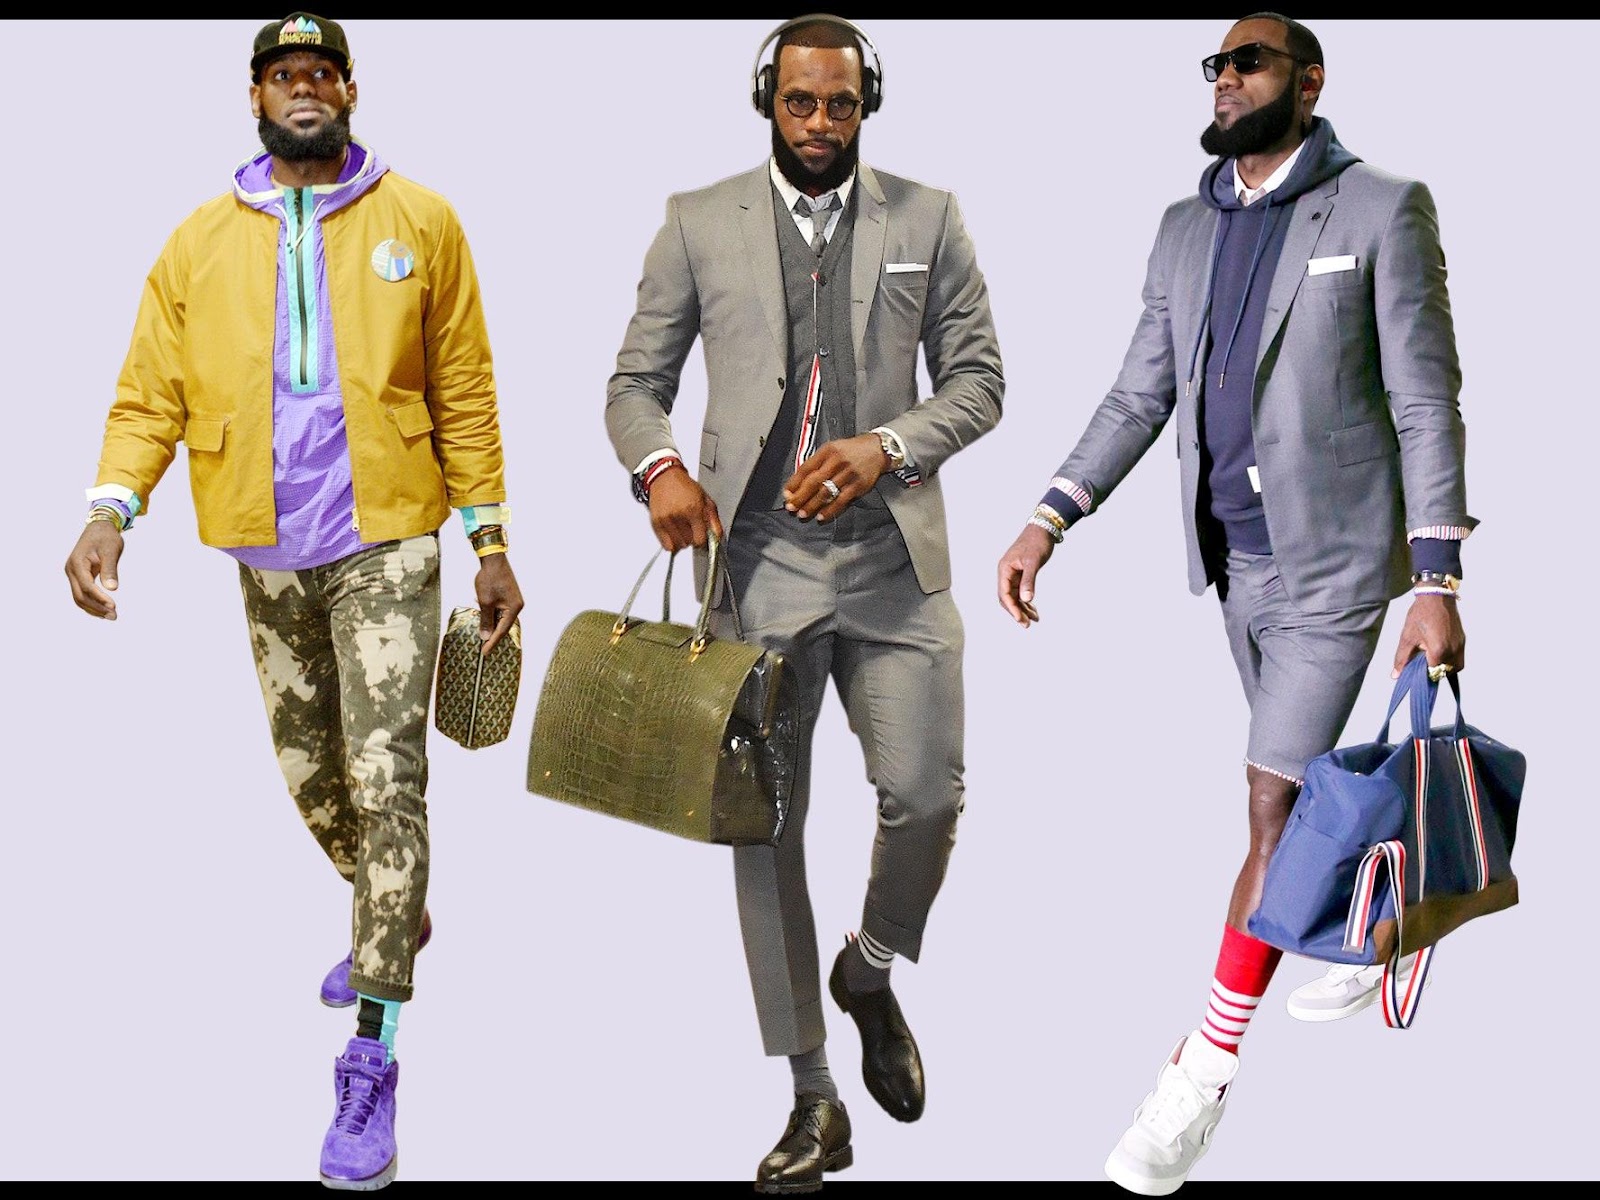 How Tailoring Made LeBron James an Icon Off the Court, Too | Vanity Fair